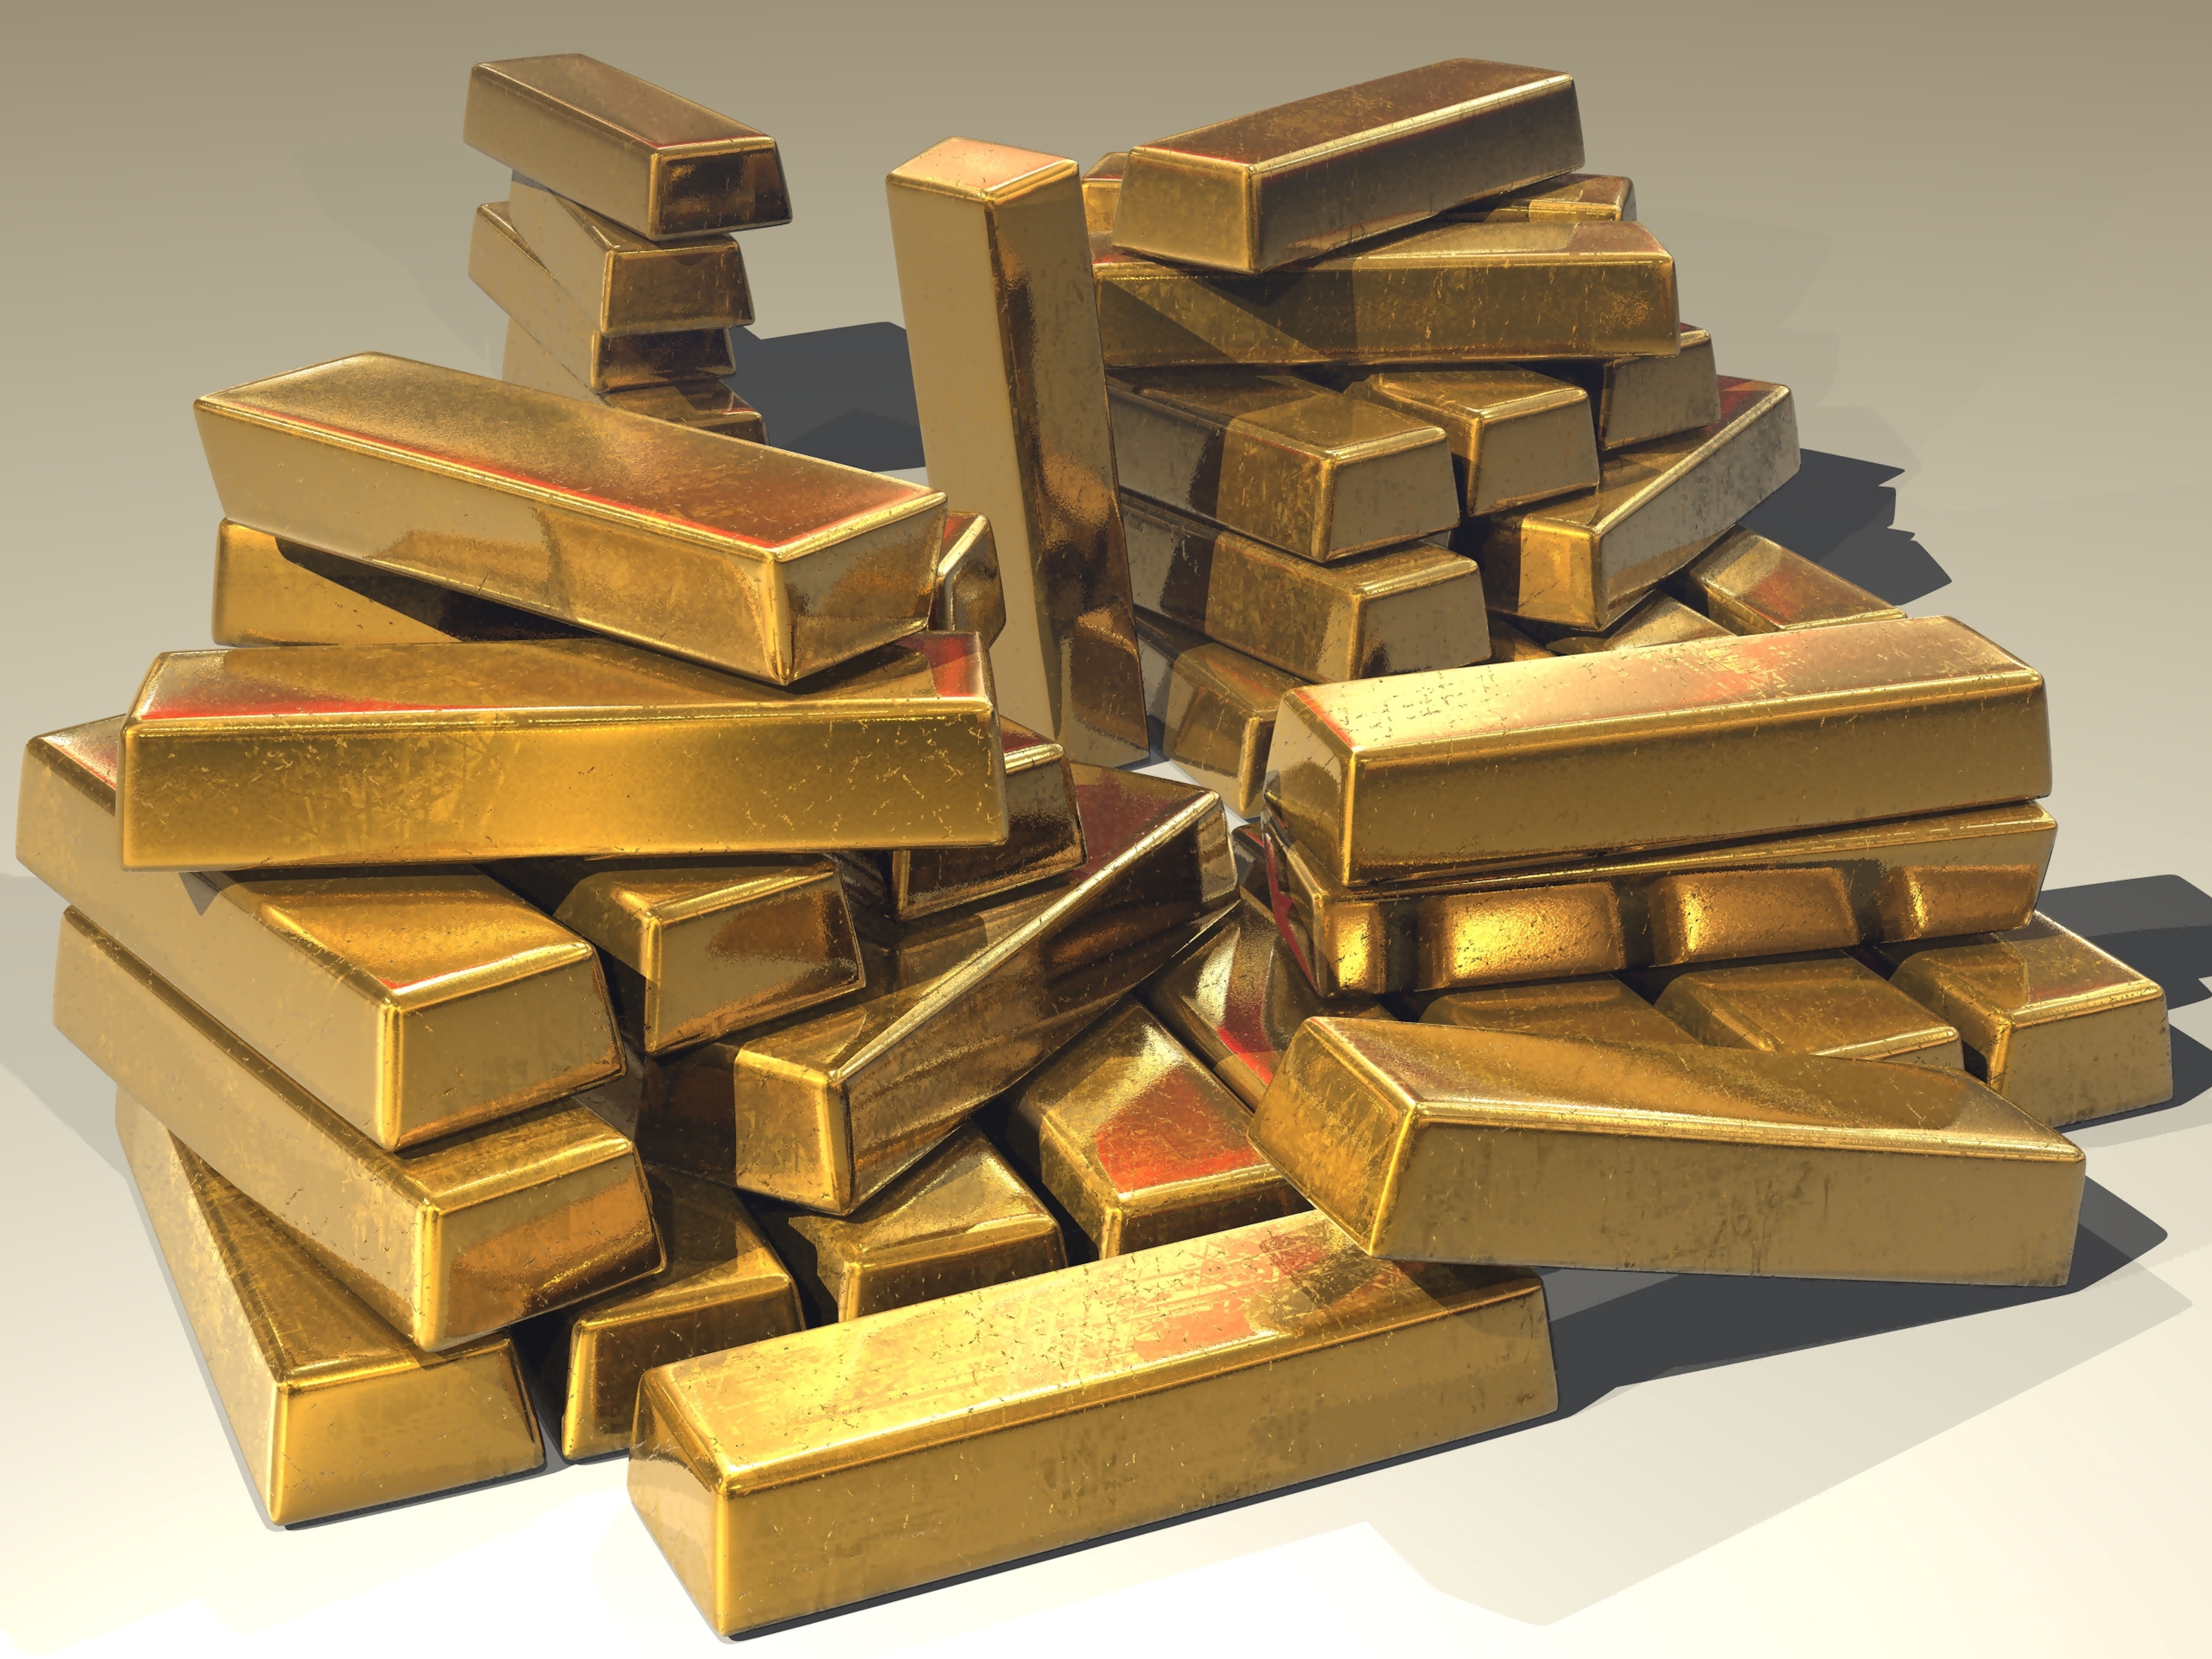 A quarter of UK investors view gold as the best investment opportunity